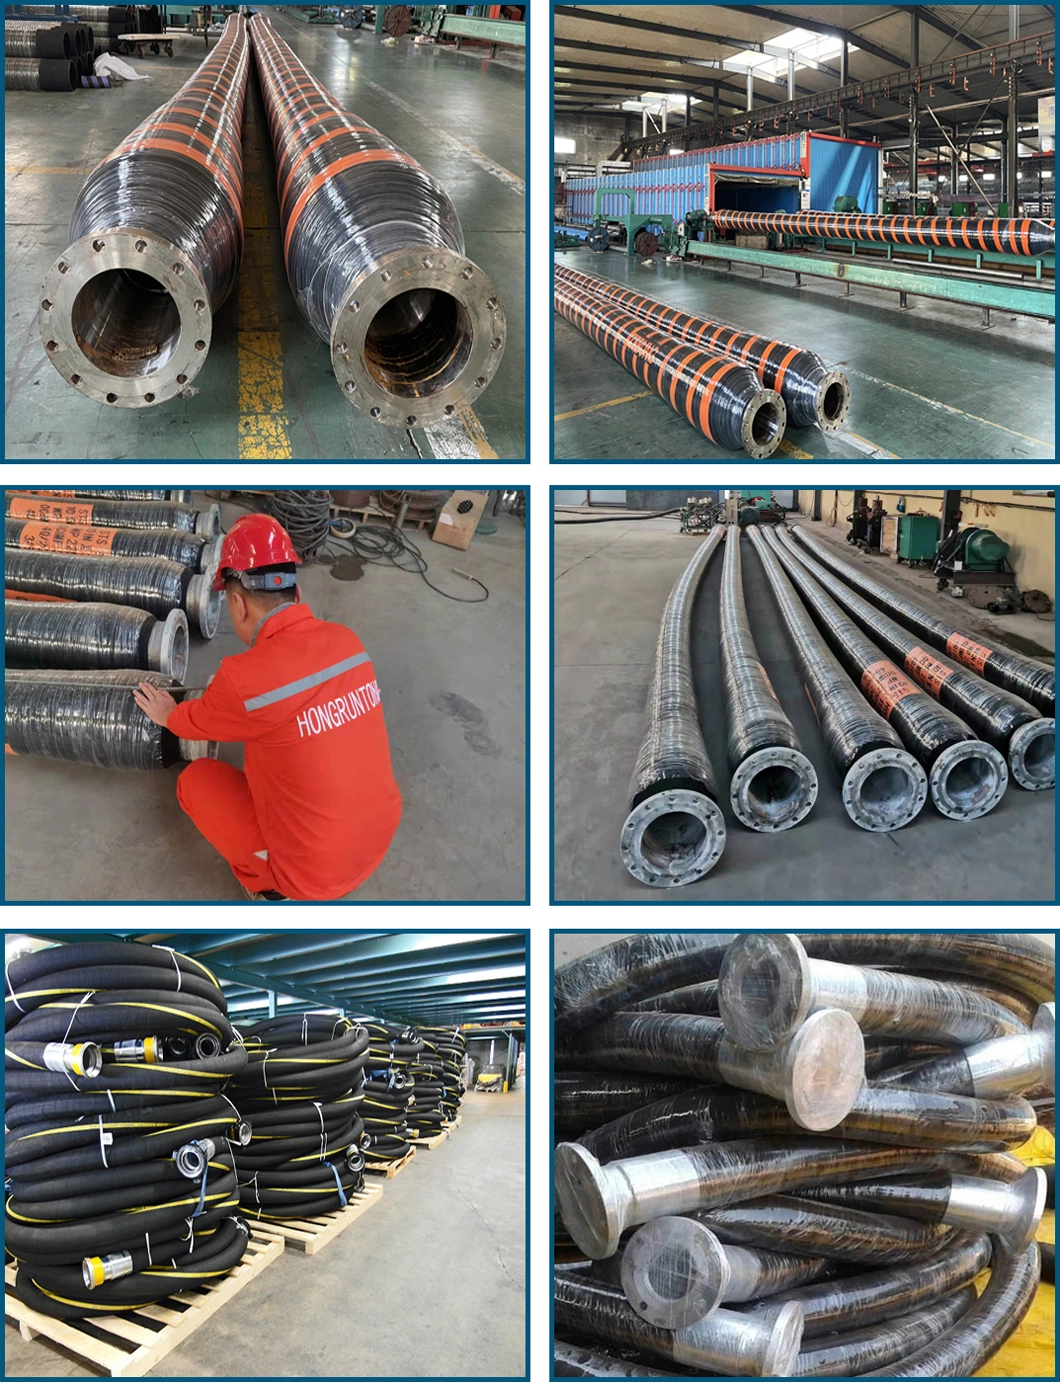 Marine Rubber Replacement Yokohama LNG Cargo Sts Hose Testing Requirements